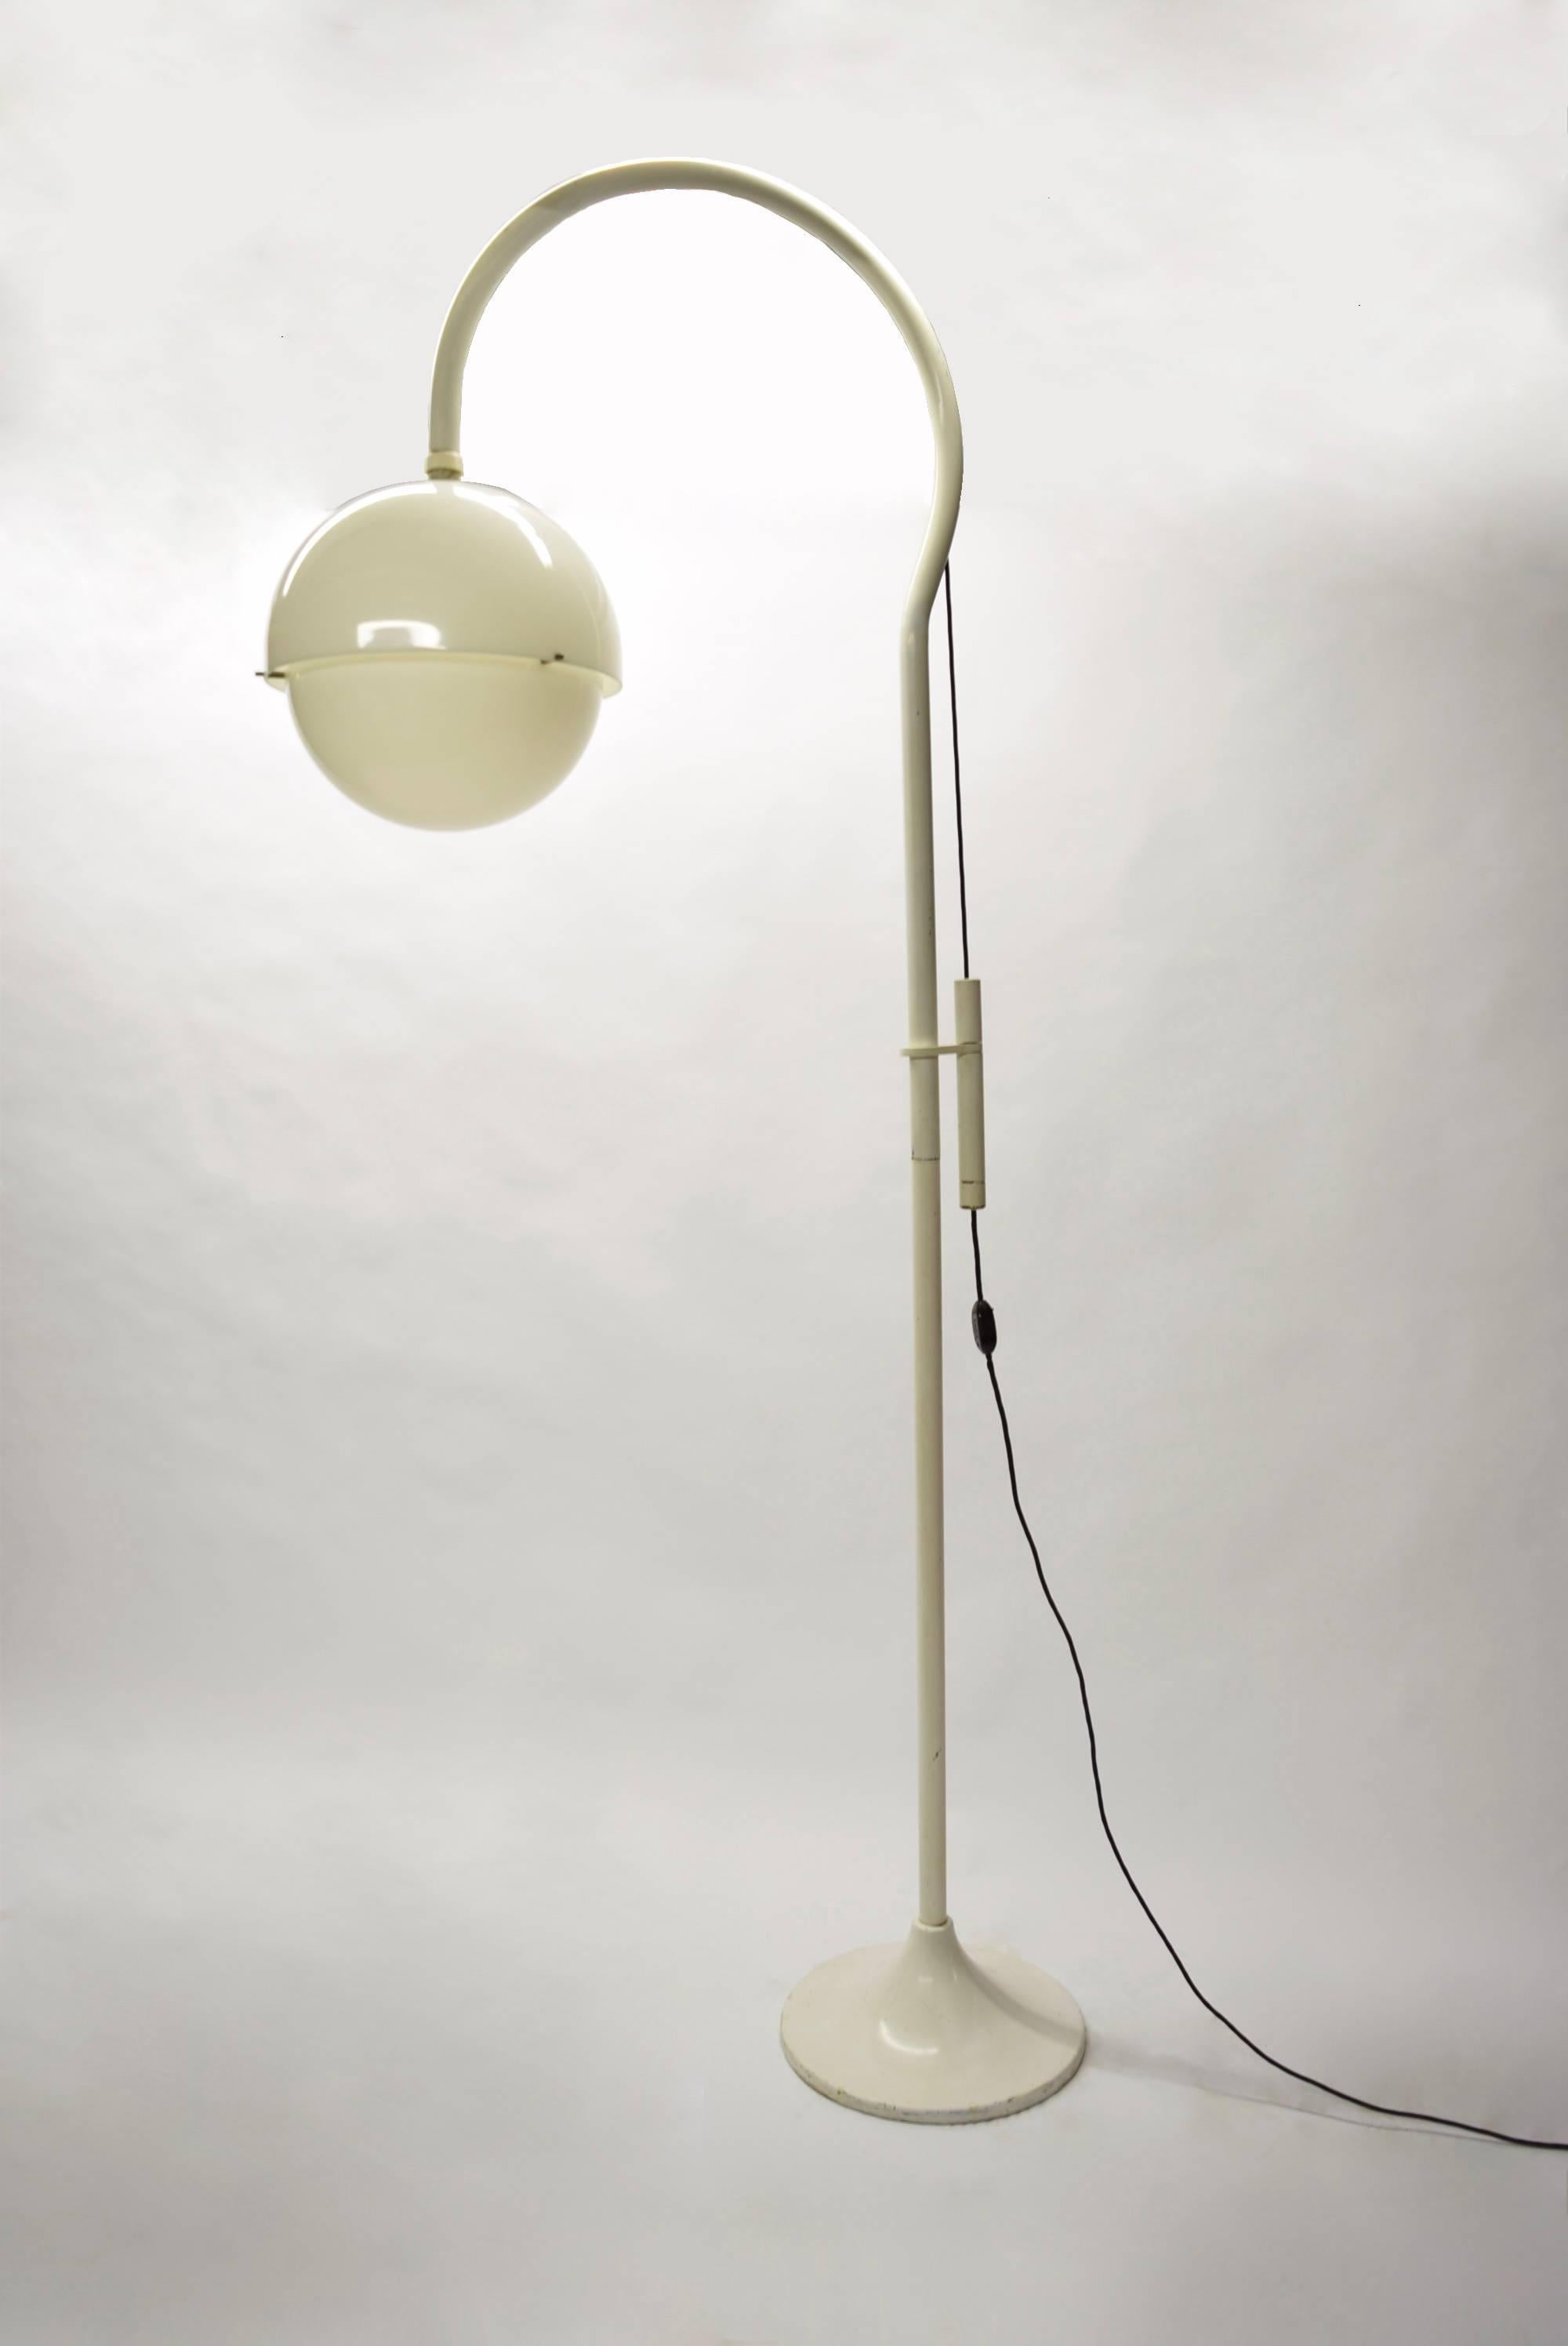 large floor lamp in lacquered metal and acrylic. Height of globe can be adjusted by pulley and counter balanced weight. The metal arm that holds the globe rotates. All original condition.

